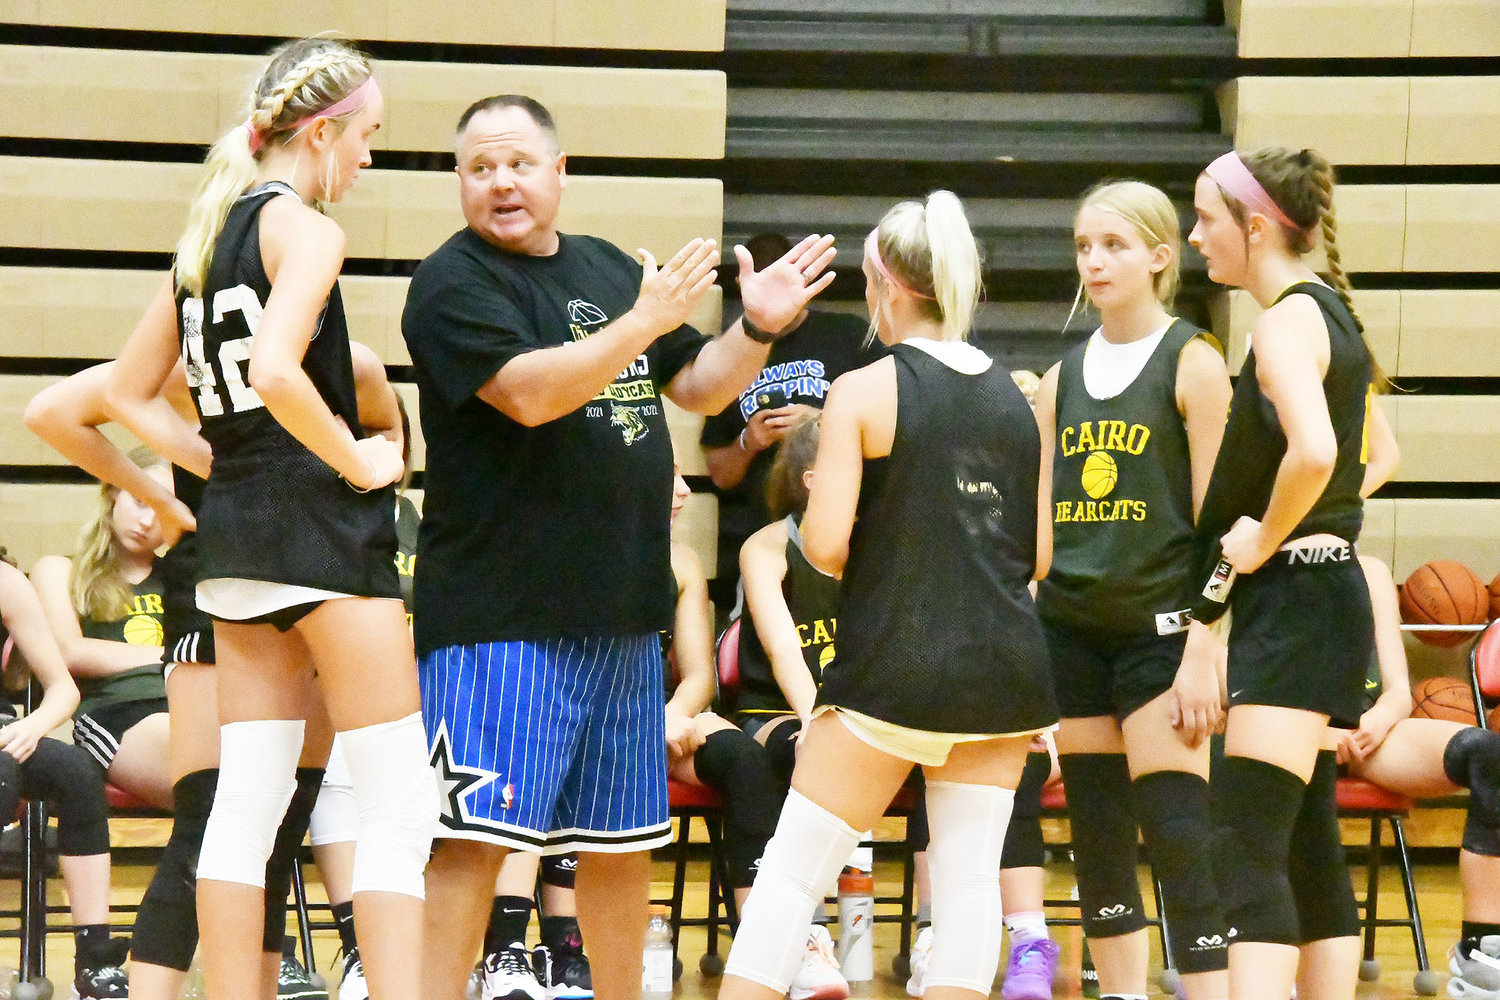 Cairo head girls' basketball coach Brian Winkler motions during a timeout while Macie Harman, Gracie Brumley, Addison Bailey and Jersey Bailey listen.